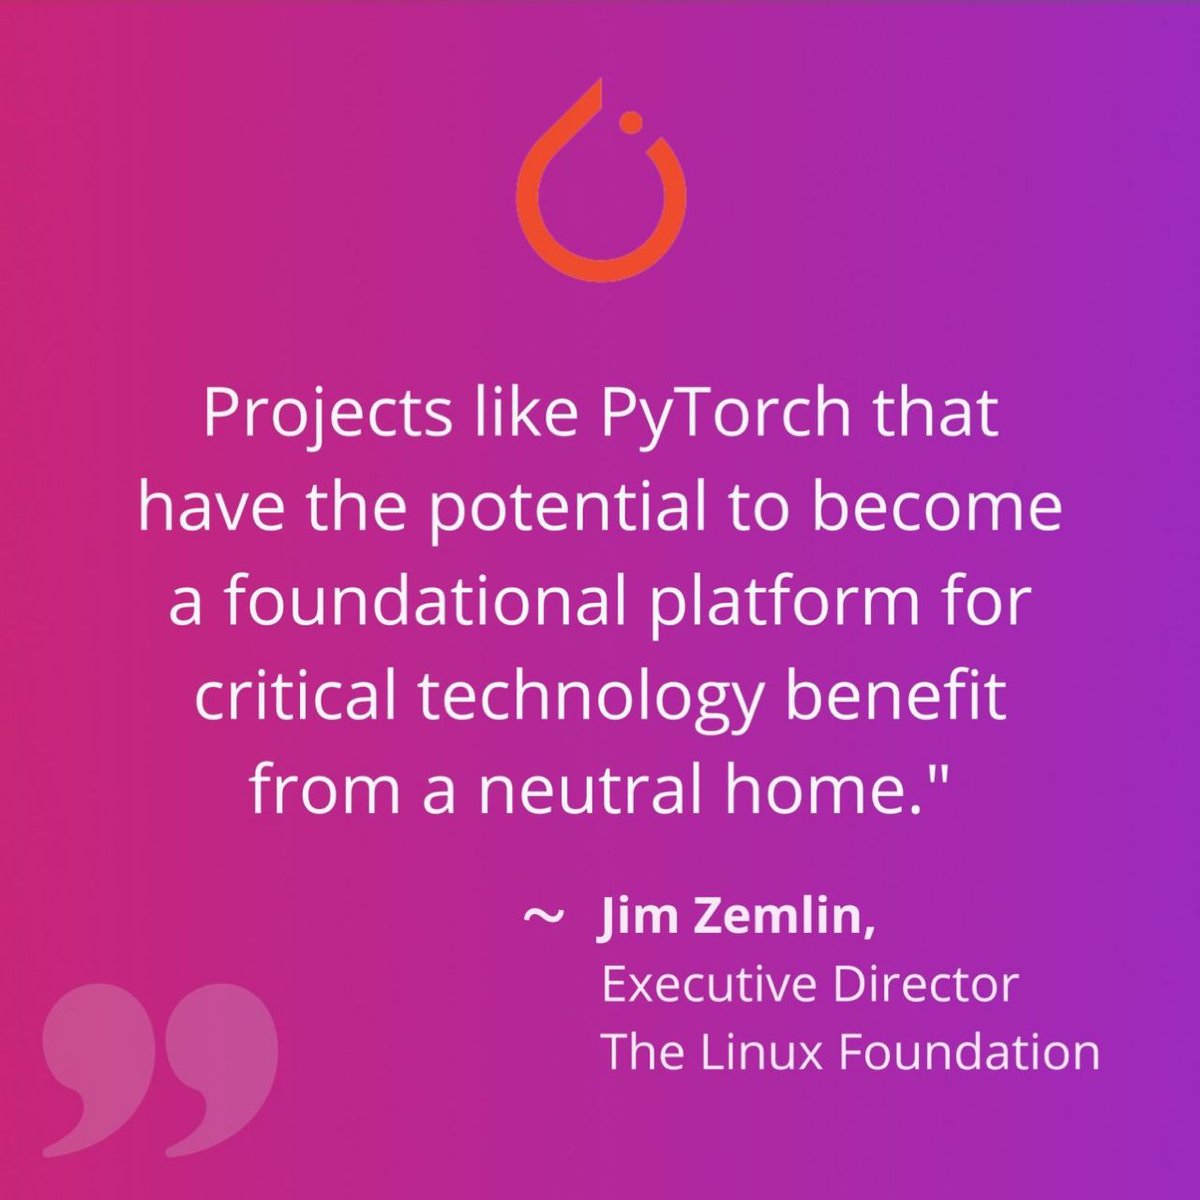 Latest addition to @linuxfoundation family of #opensource projects. @PyTorch, leading #AI framework has over 2400 #contributors, 150k + projects on GitHub & adopted by 18,0000 organizations.
#linuxfoundation #meta #pytorch #datascience #google #pytorchfoundation #aws #amd #NVIDIA